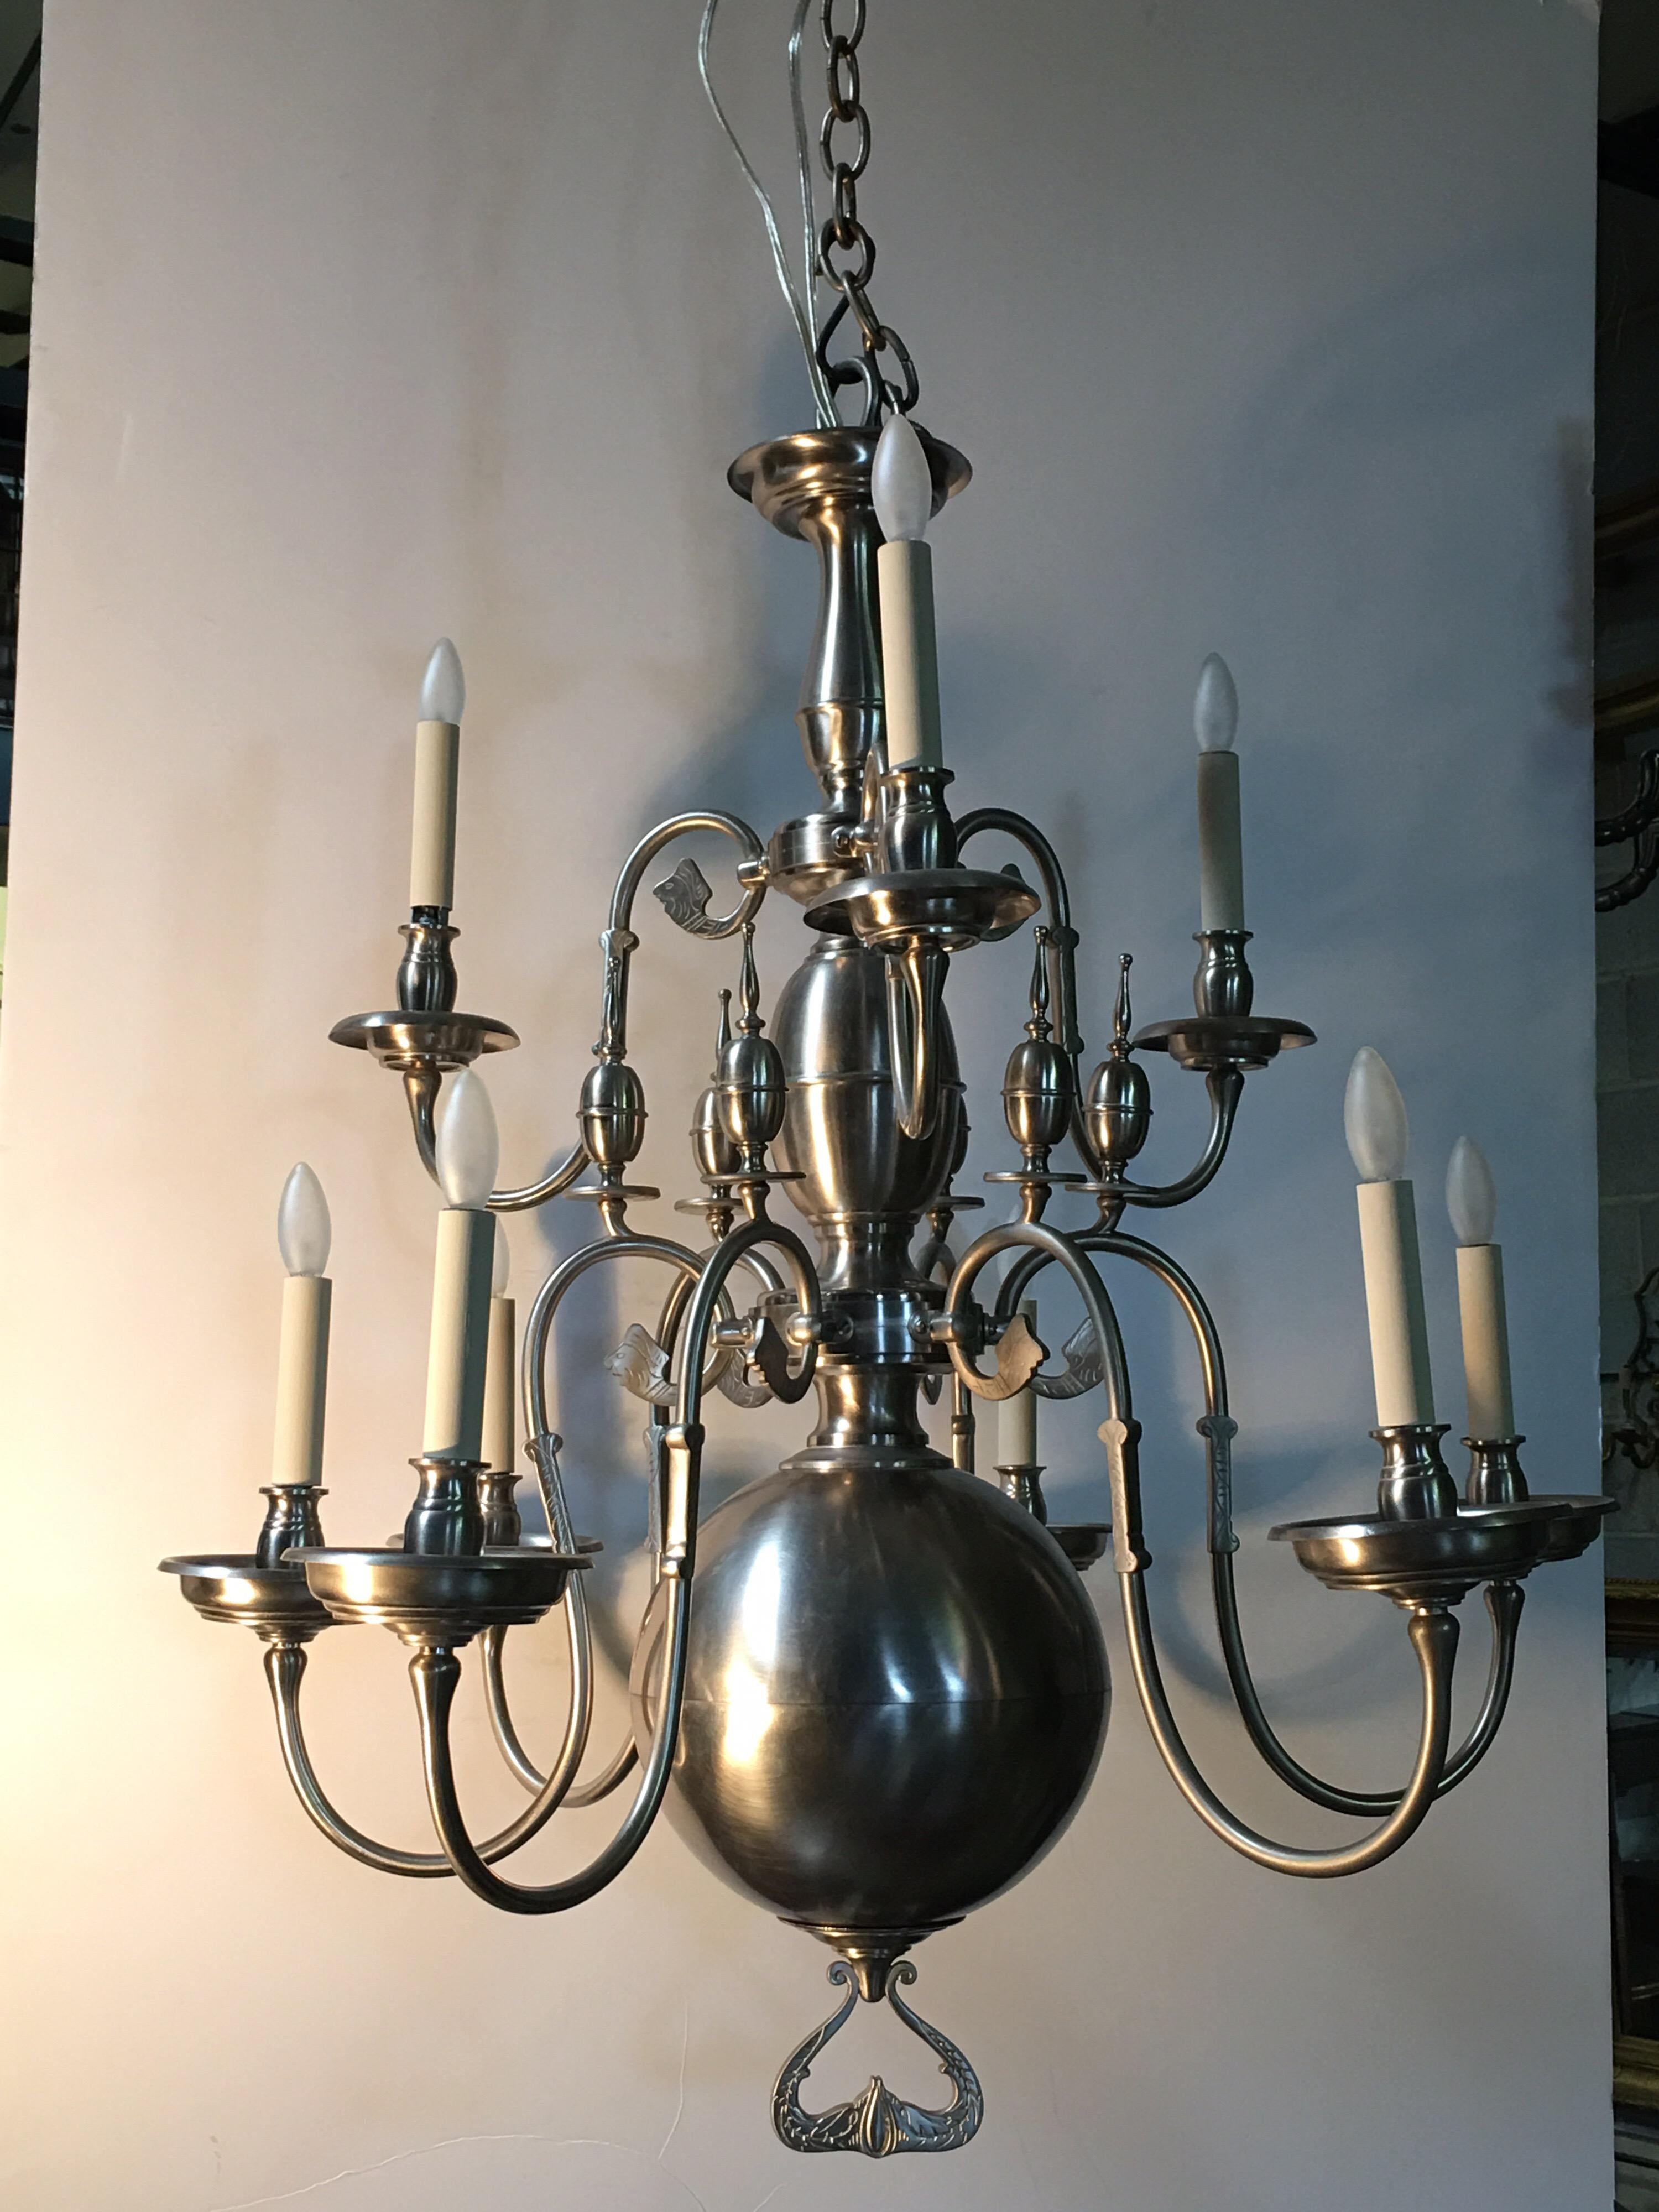 A 19th century Flemish chandelier with a pewter finish.